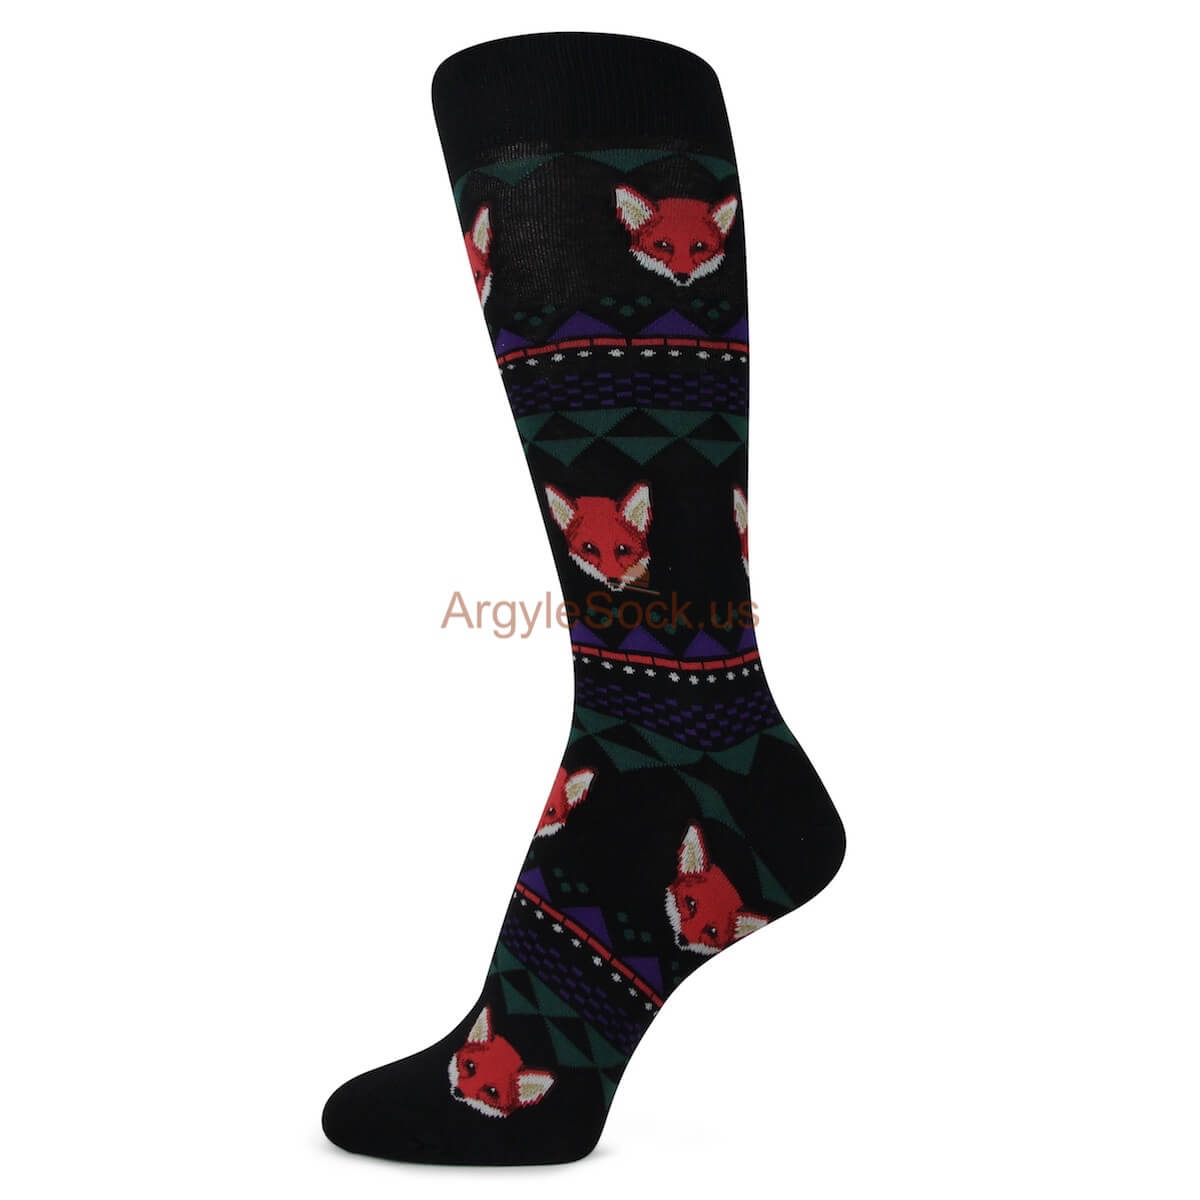 Black Top with Fox Indian Pattern Socks for Men